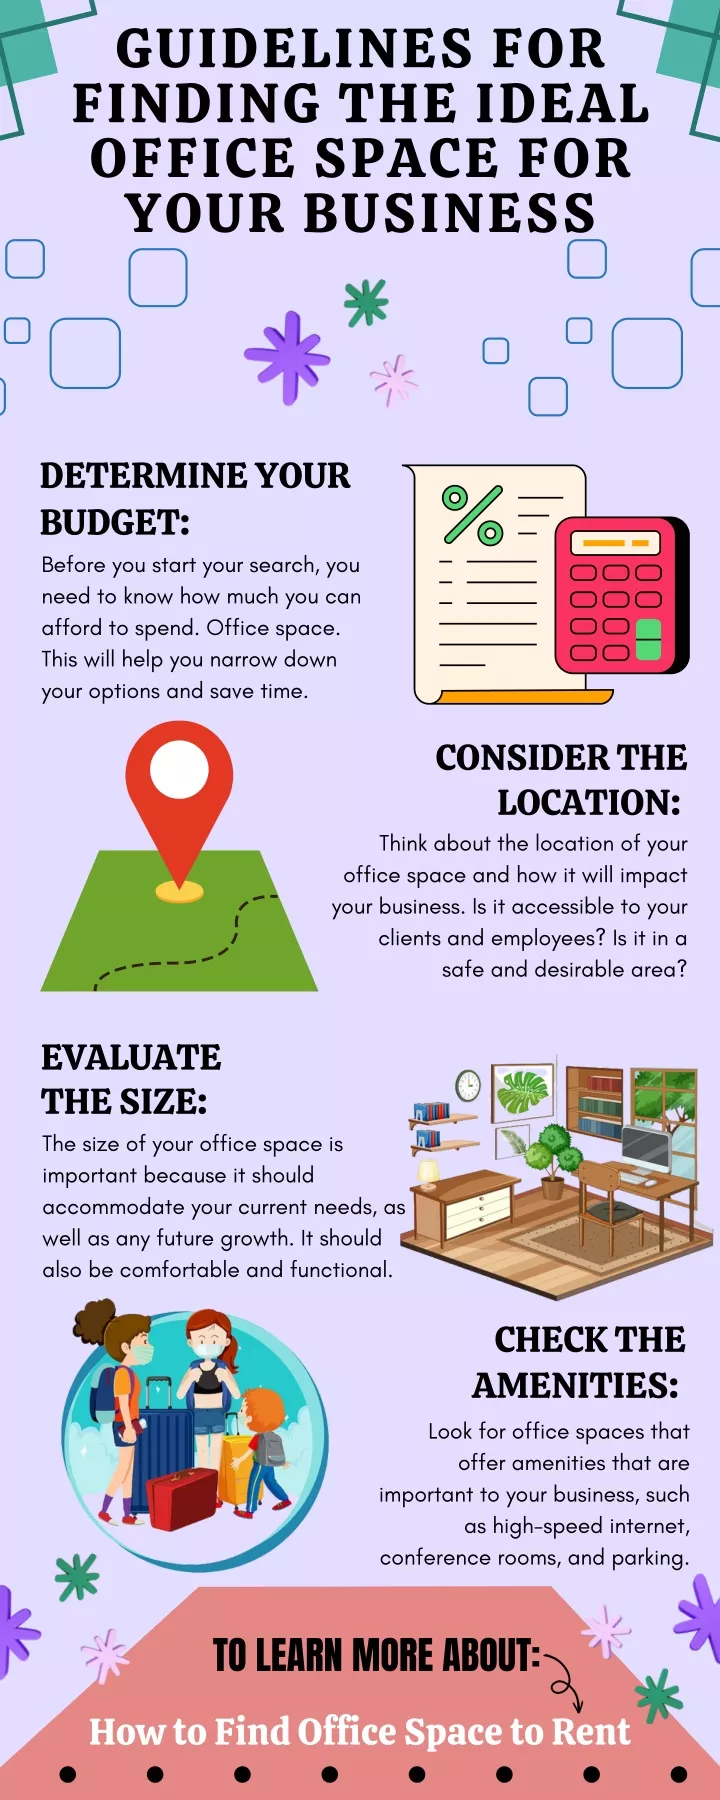 guidelines for finding the ideal office space